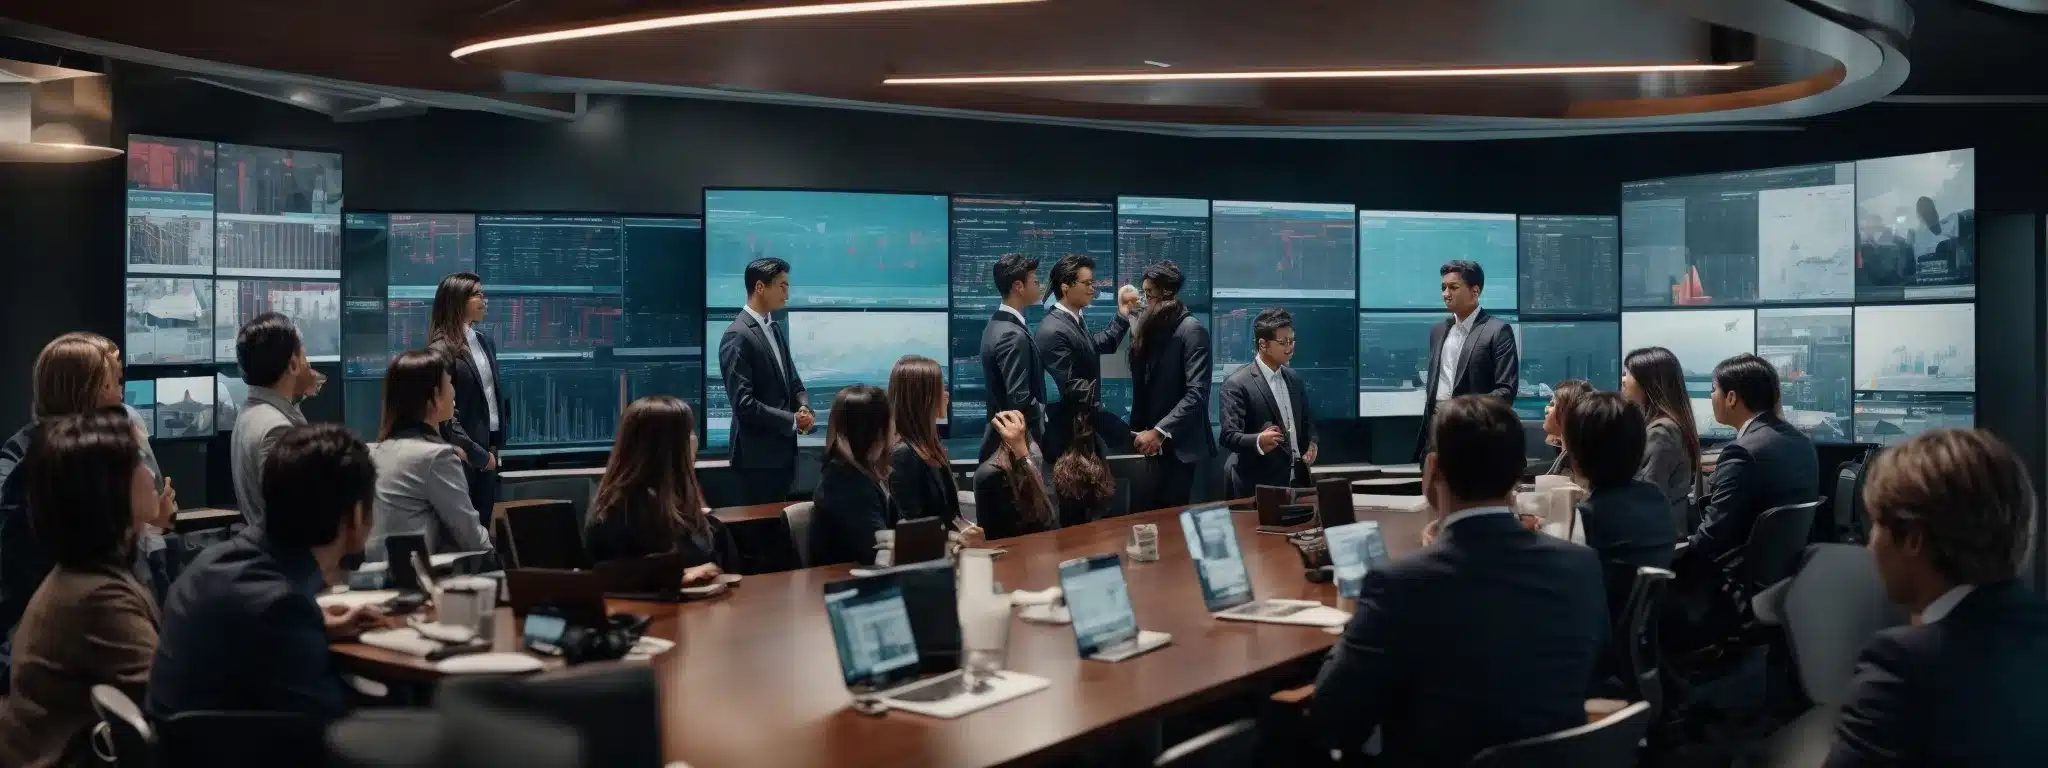 A Group Of Professionals Gather Around A Modern, Bright Conference Table, Focused And Engaged With Vibrant Digital Screens Displaying Marketing Analytics.